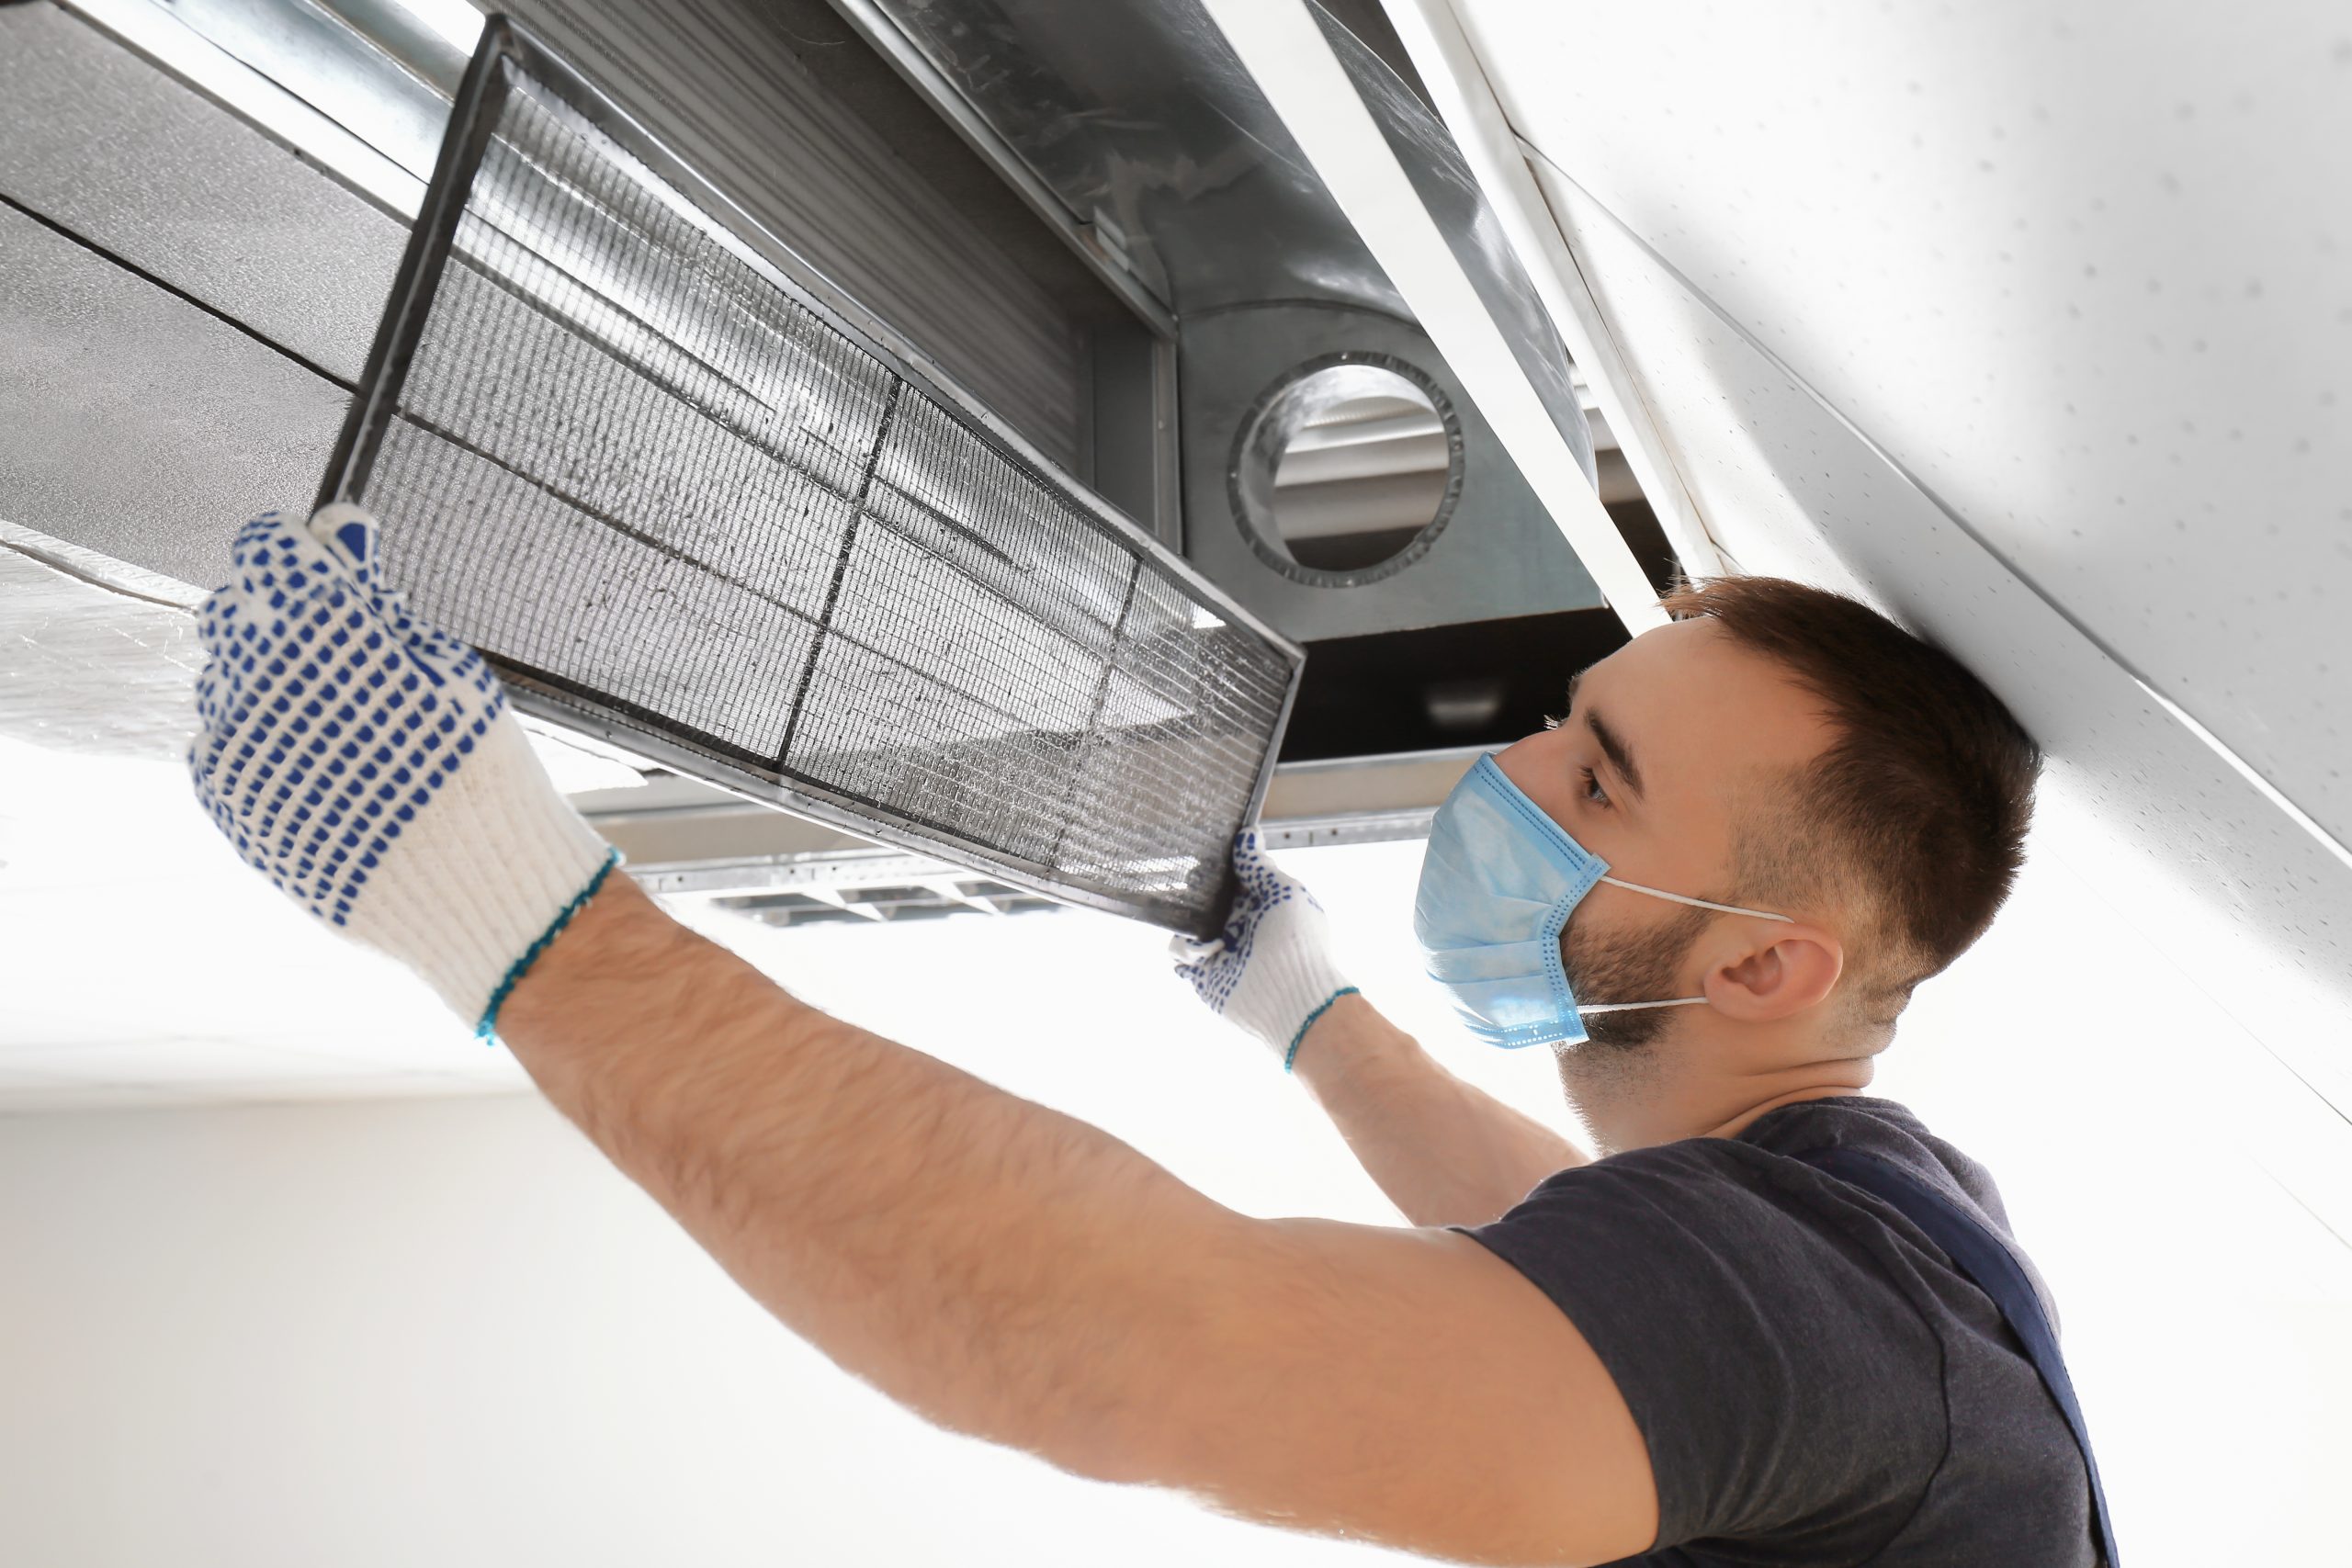 Duct Cleaning - How to Know When It's Time